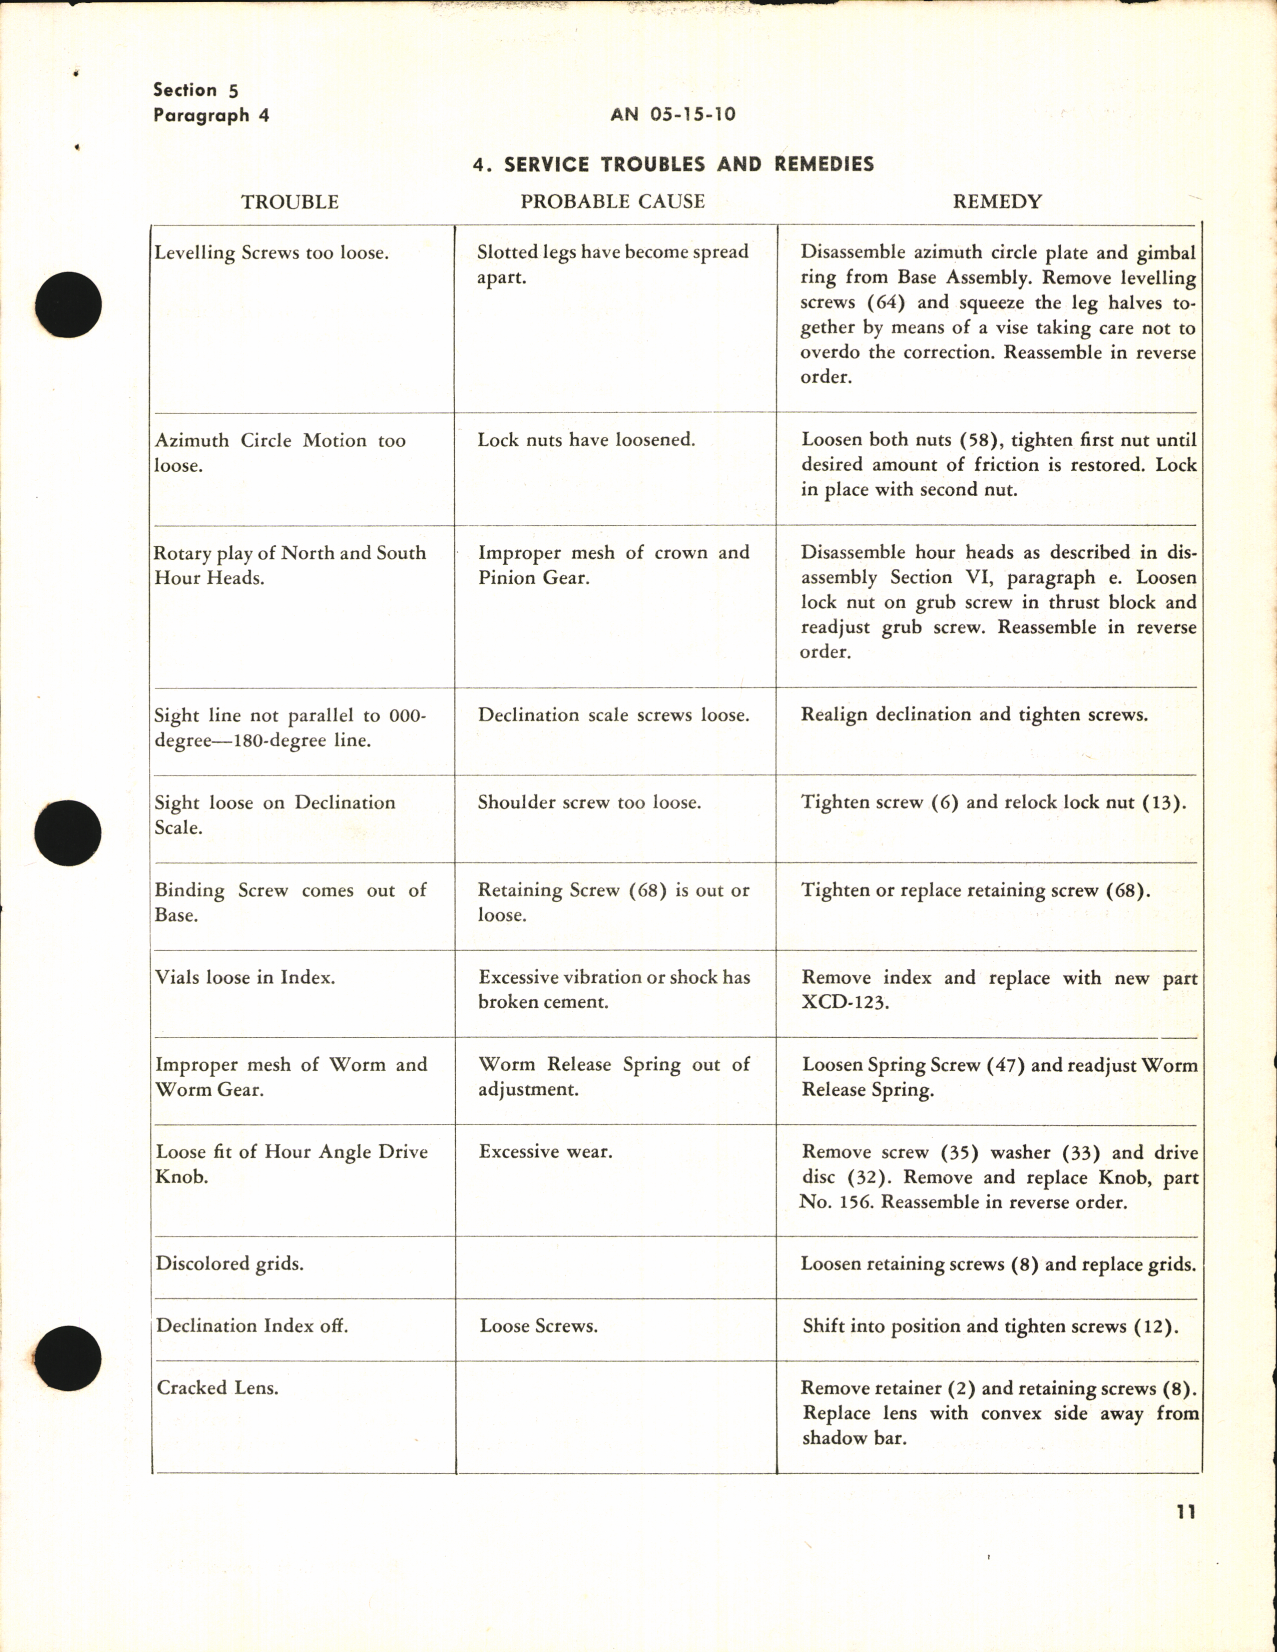 Sample page 5 from AirCorps Library document: Handbook of Instructions with Parts Catalog for Mark II Astro Compass